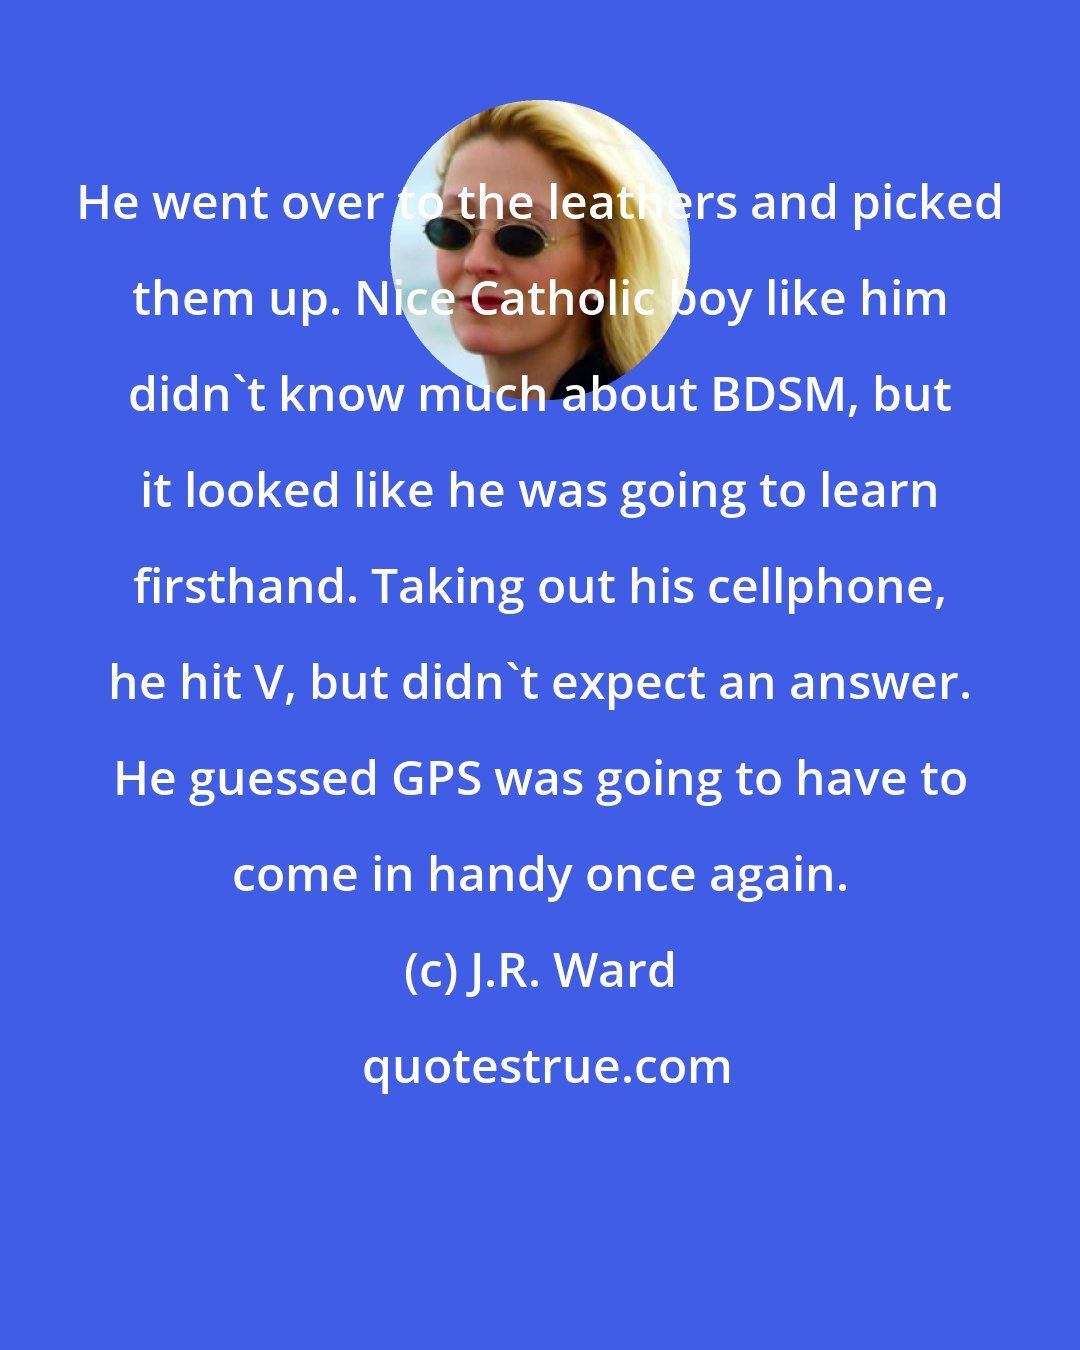 J.R. Ward: He went over to the leathers and picked them up. Nice Catholic boy like him didn't know much about BDSM, but it looked like he was going to learn firsthand. Taking out his cellphone, he hit V, but didn't expect an answer. He guessed GPS was going to have to come in handy once again.